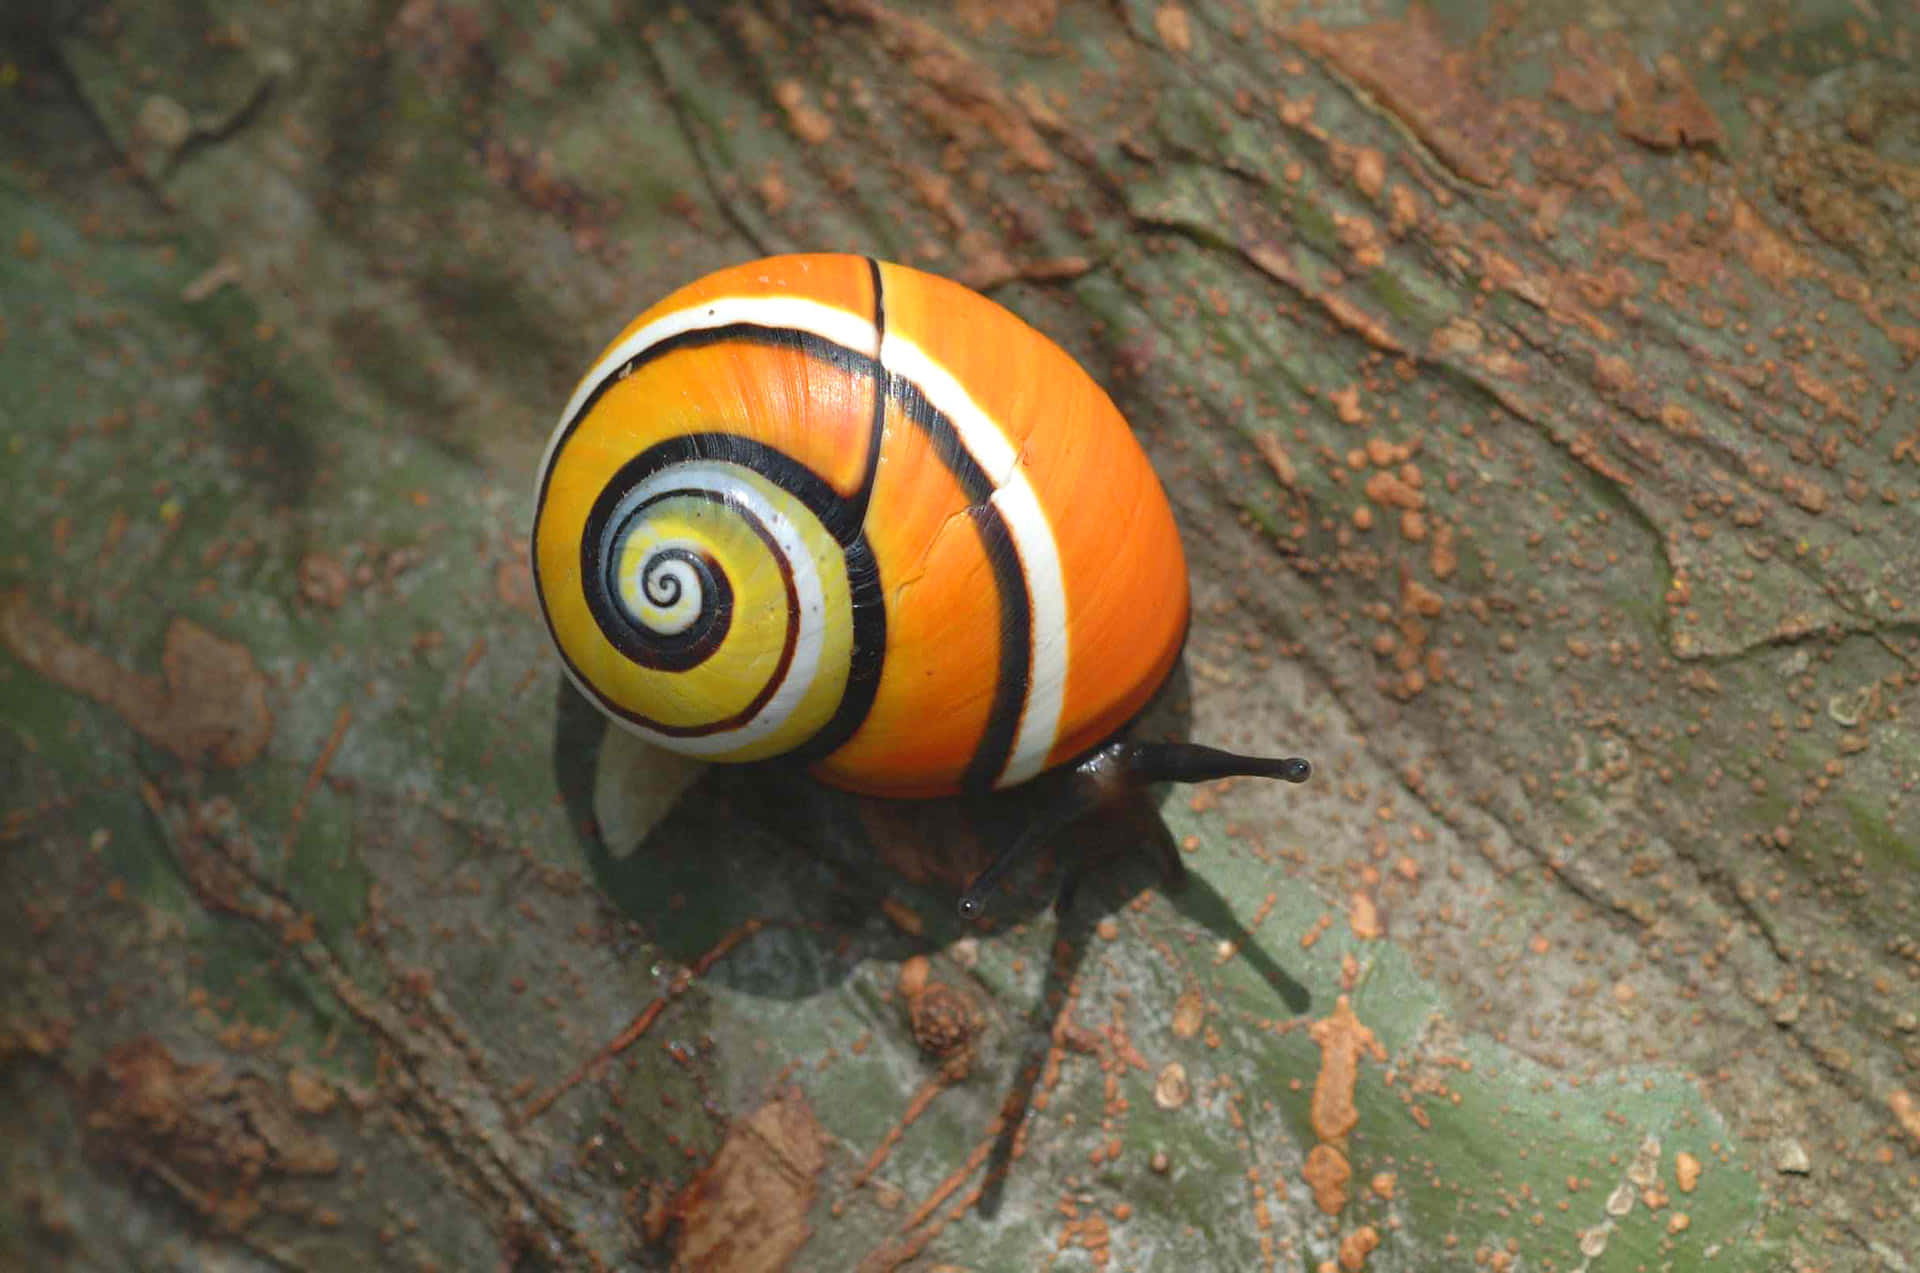 Showcasing the Creature of Nature - A Snail